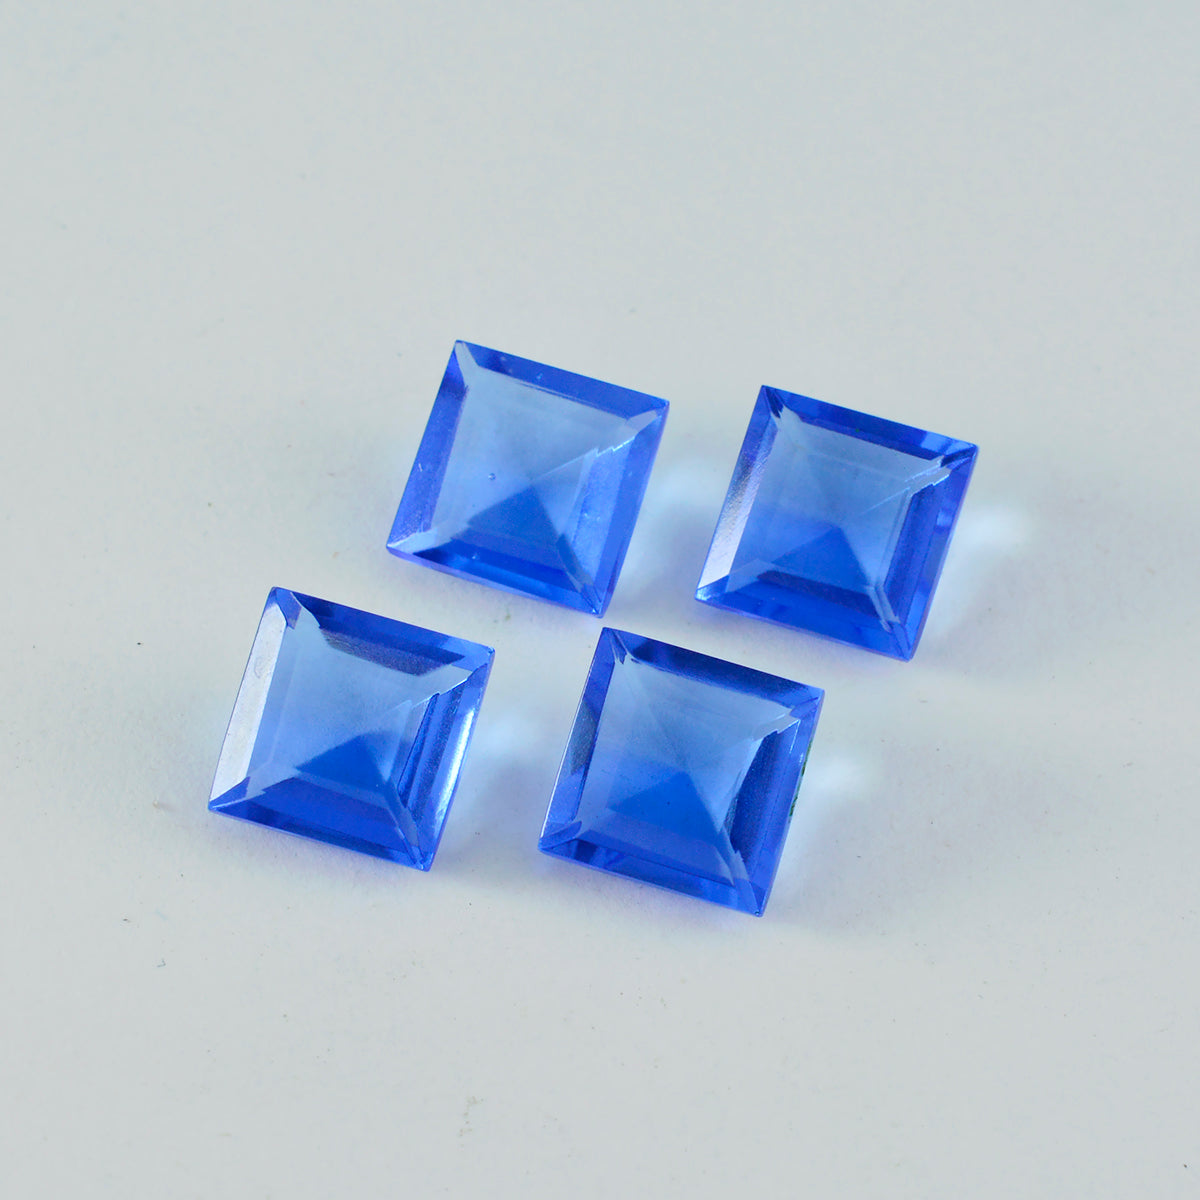 Riyogems 1PC Blue Sapphire CZ Faceted 11x11 mm Square Shape good-looking Quality Loose Gems